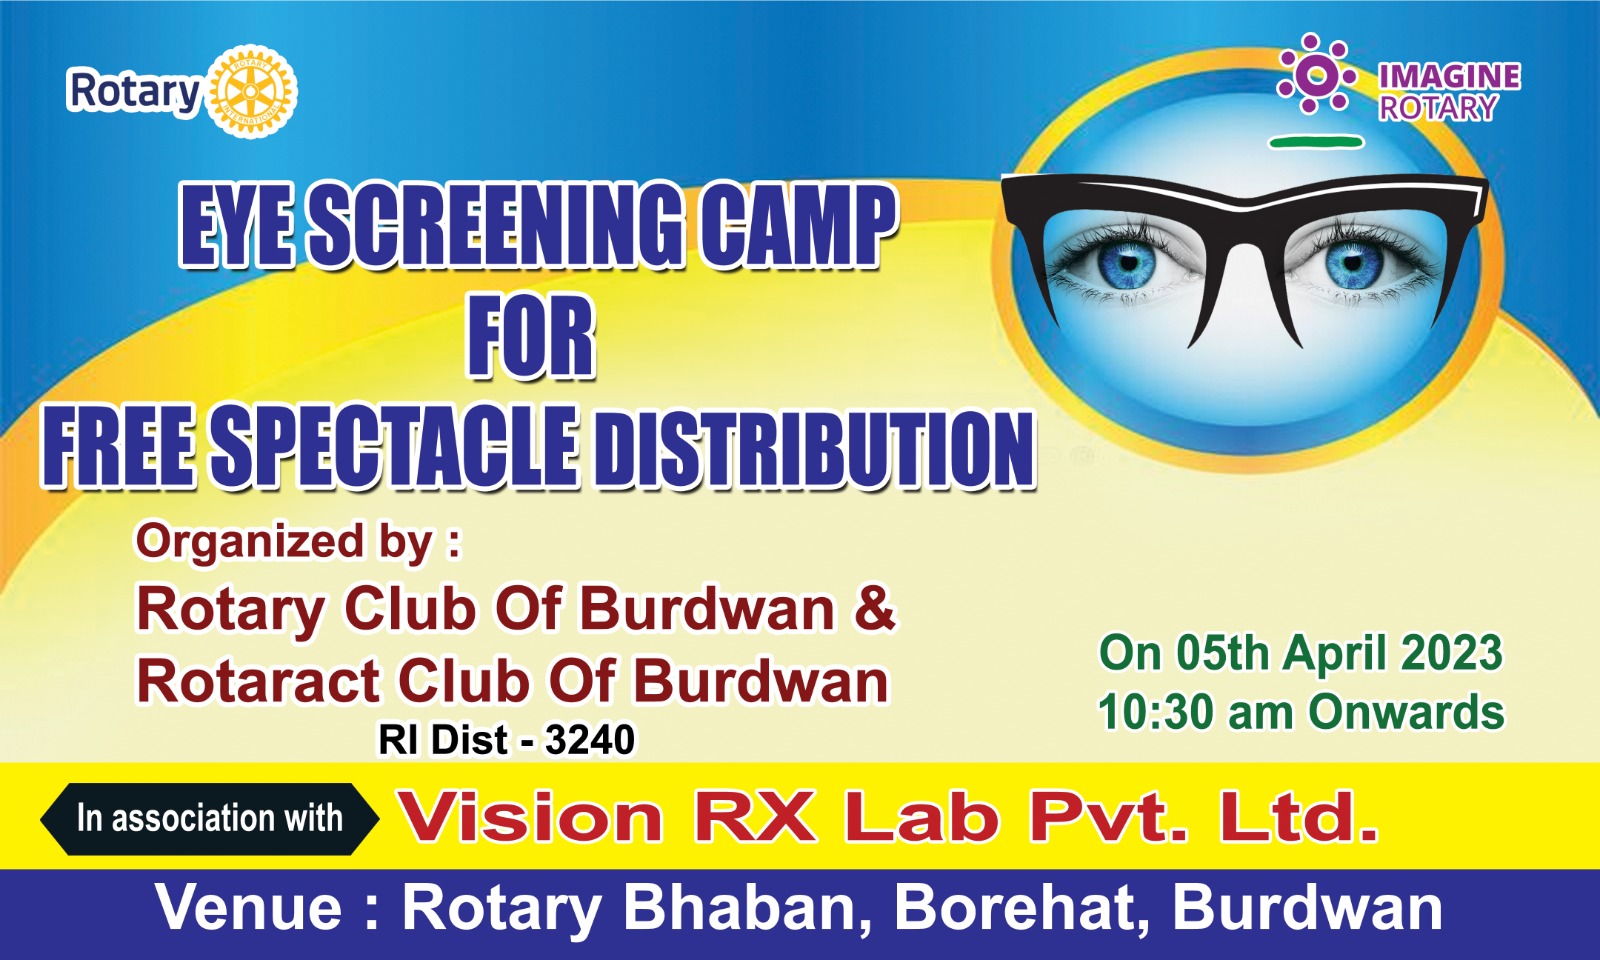 Eye check up camp and free distribution of spectacles with powered glasses.